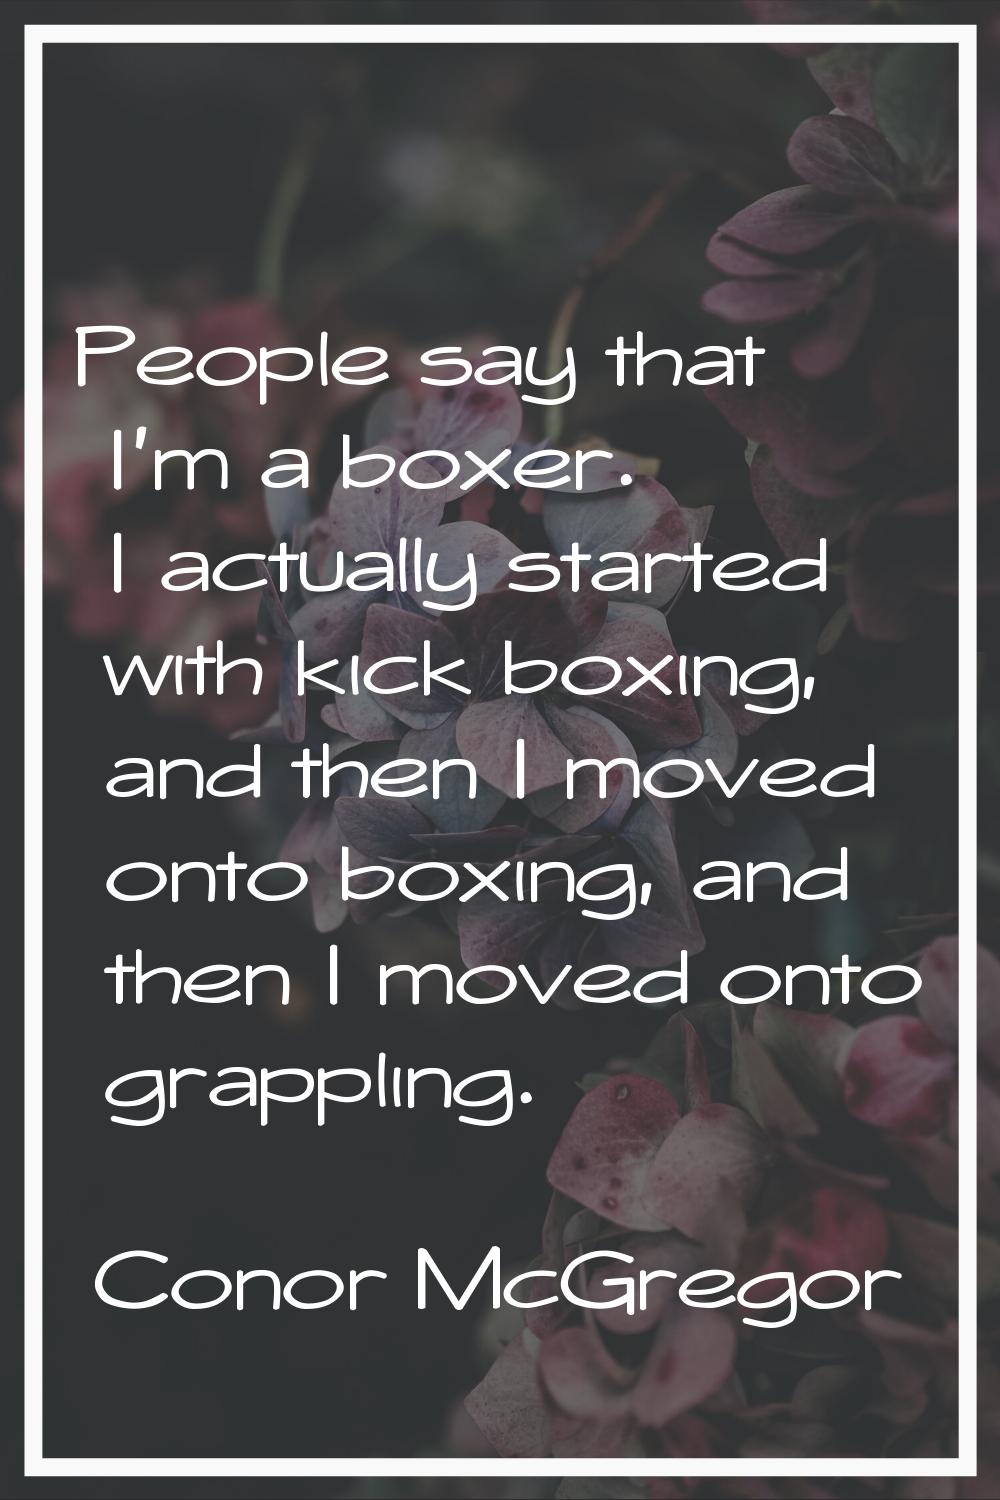 People say that I'm a boxer. I actually started with kick boxing, and then I moved onto boxing, and